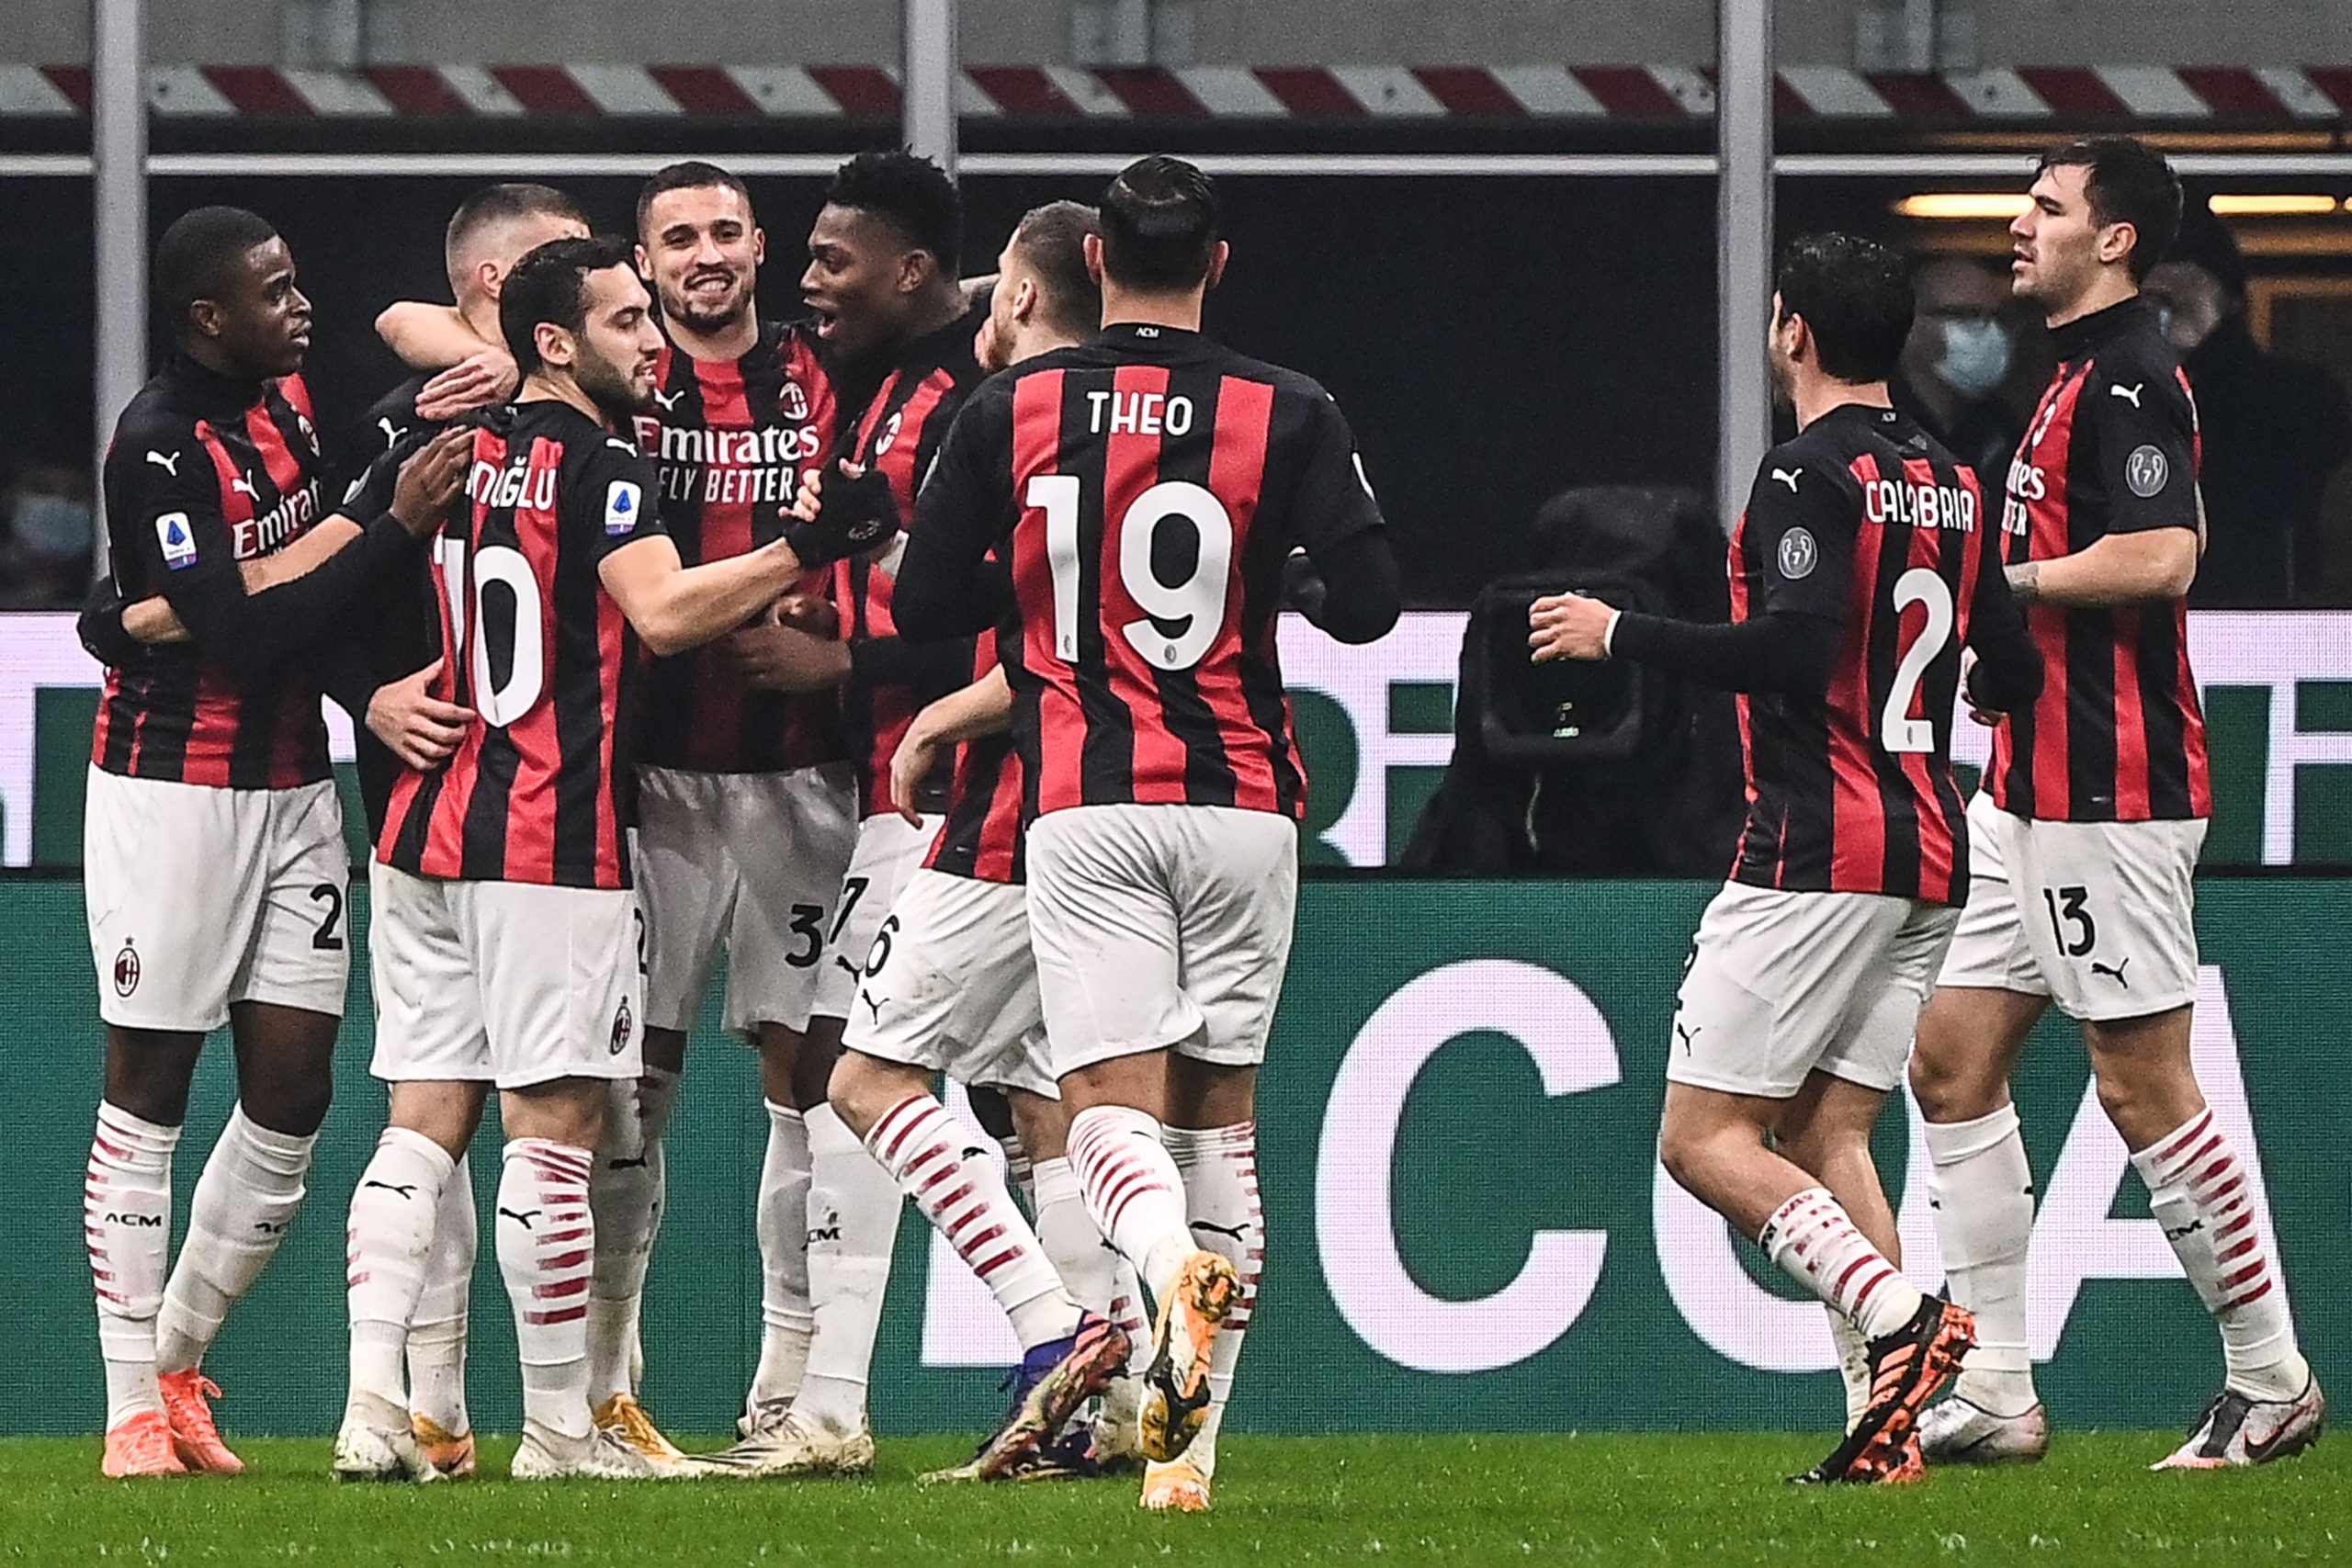 At the end of 3-2 thriller against Lazio in Serie A Round 14, Milan ended their year on a high note, wrapping their 16th match in row with 2 or more goals